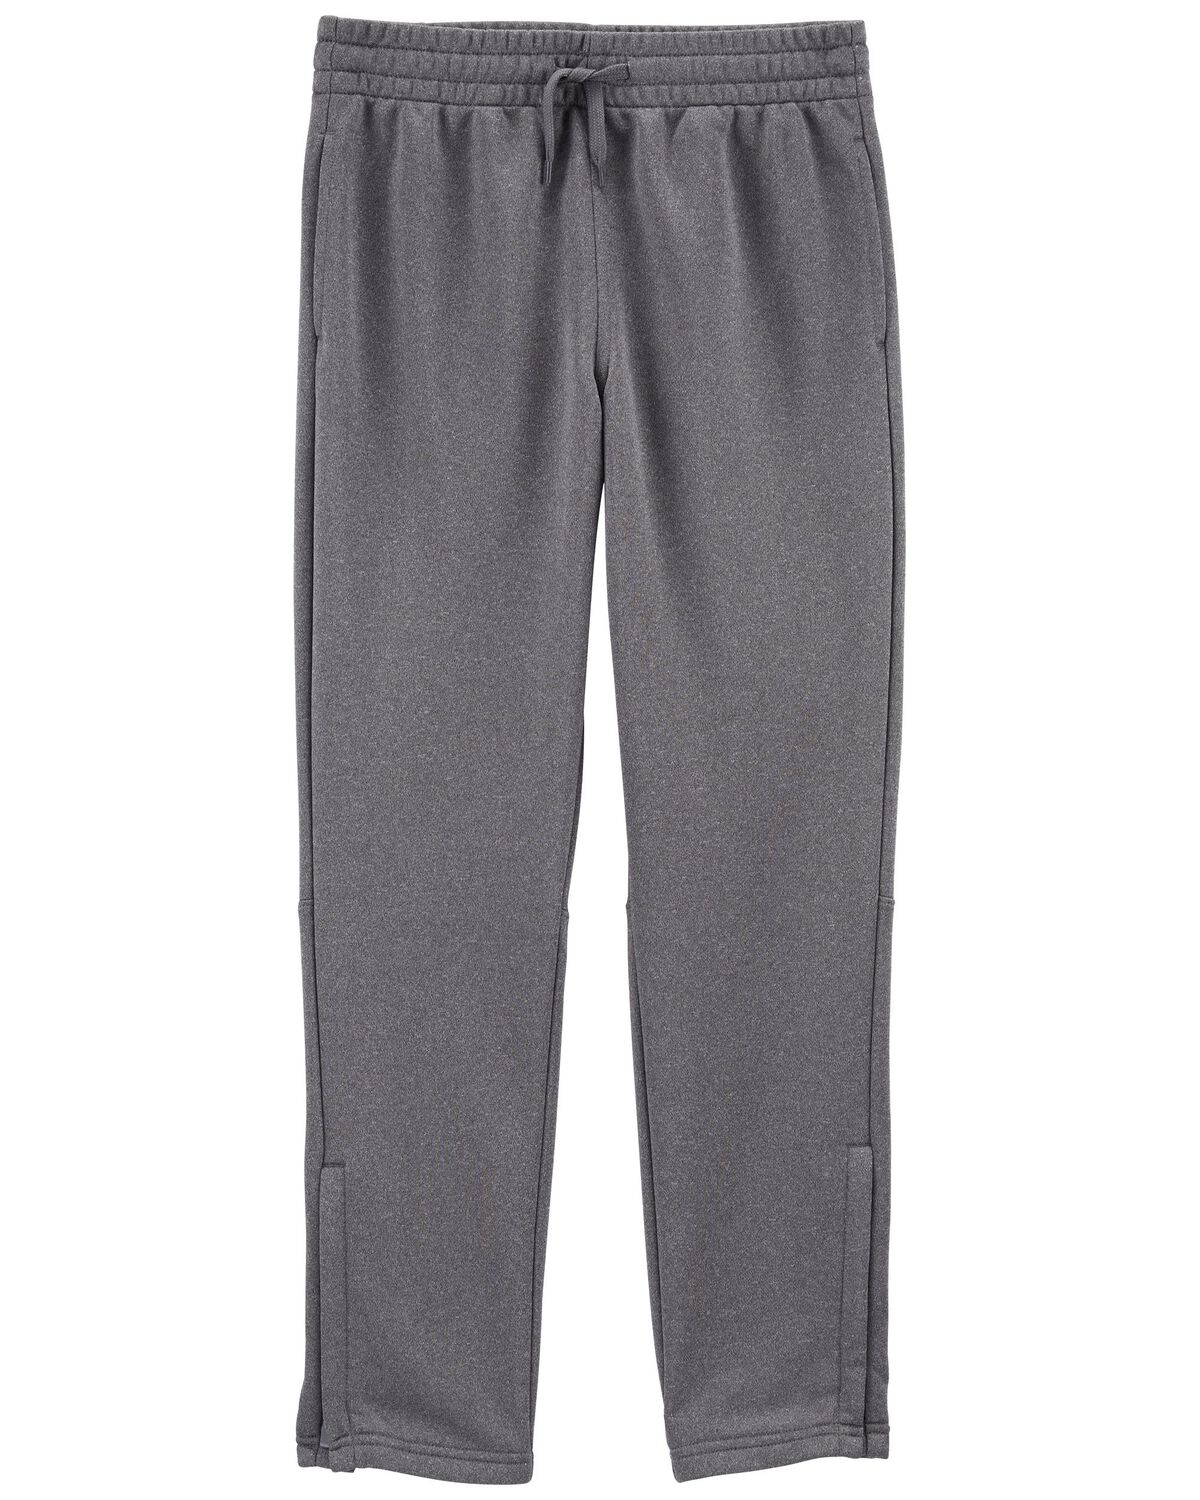 Grey Kid Active Warm Up Pants in Unstoppable French Terry | oshkosh.com